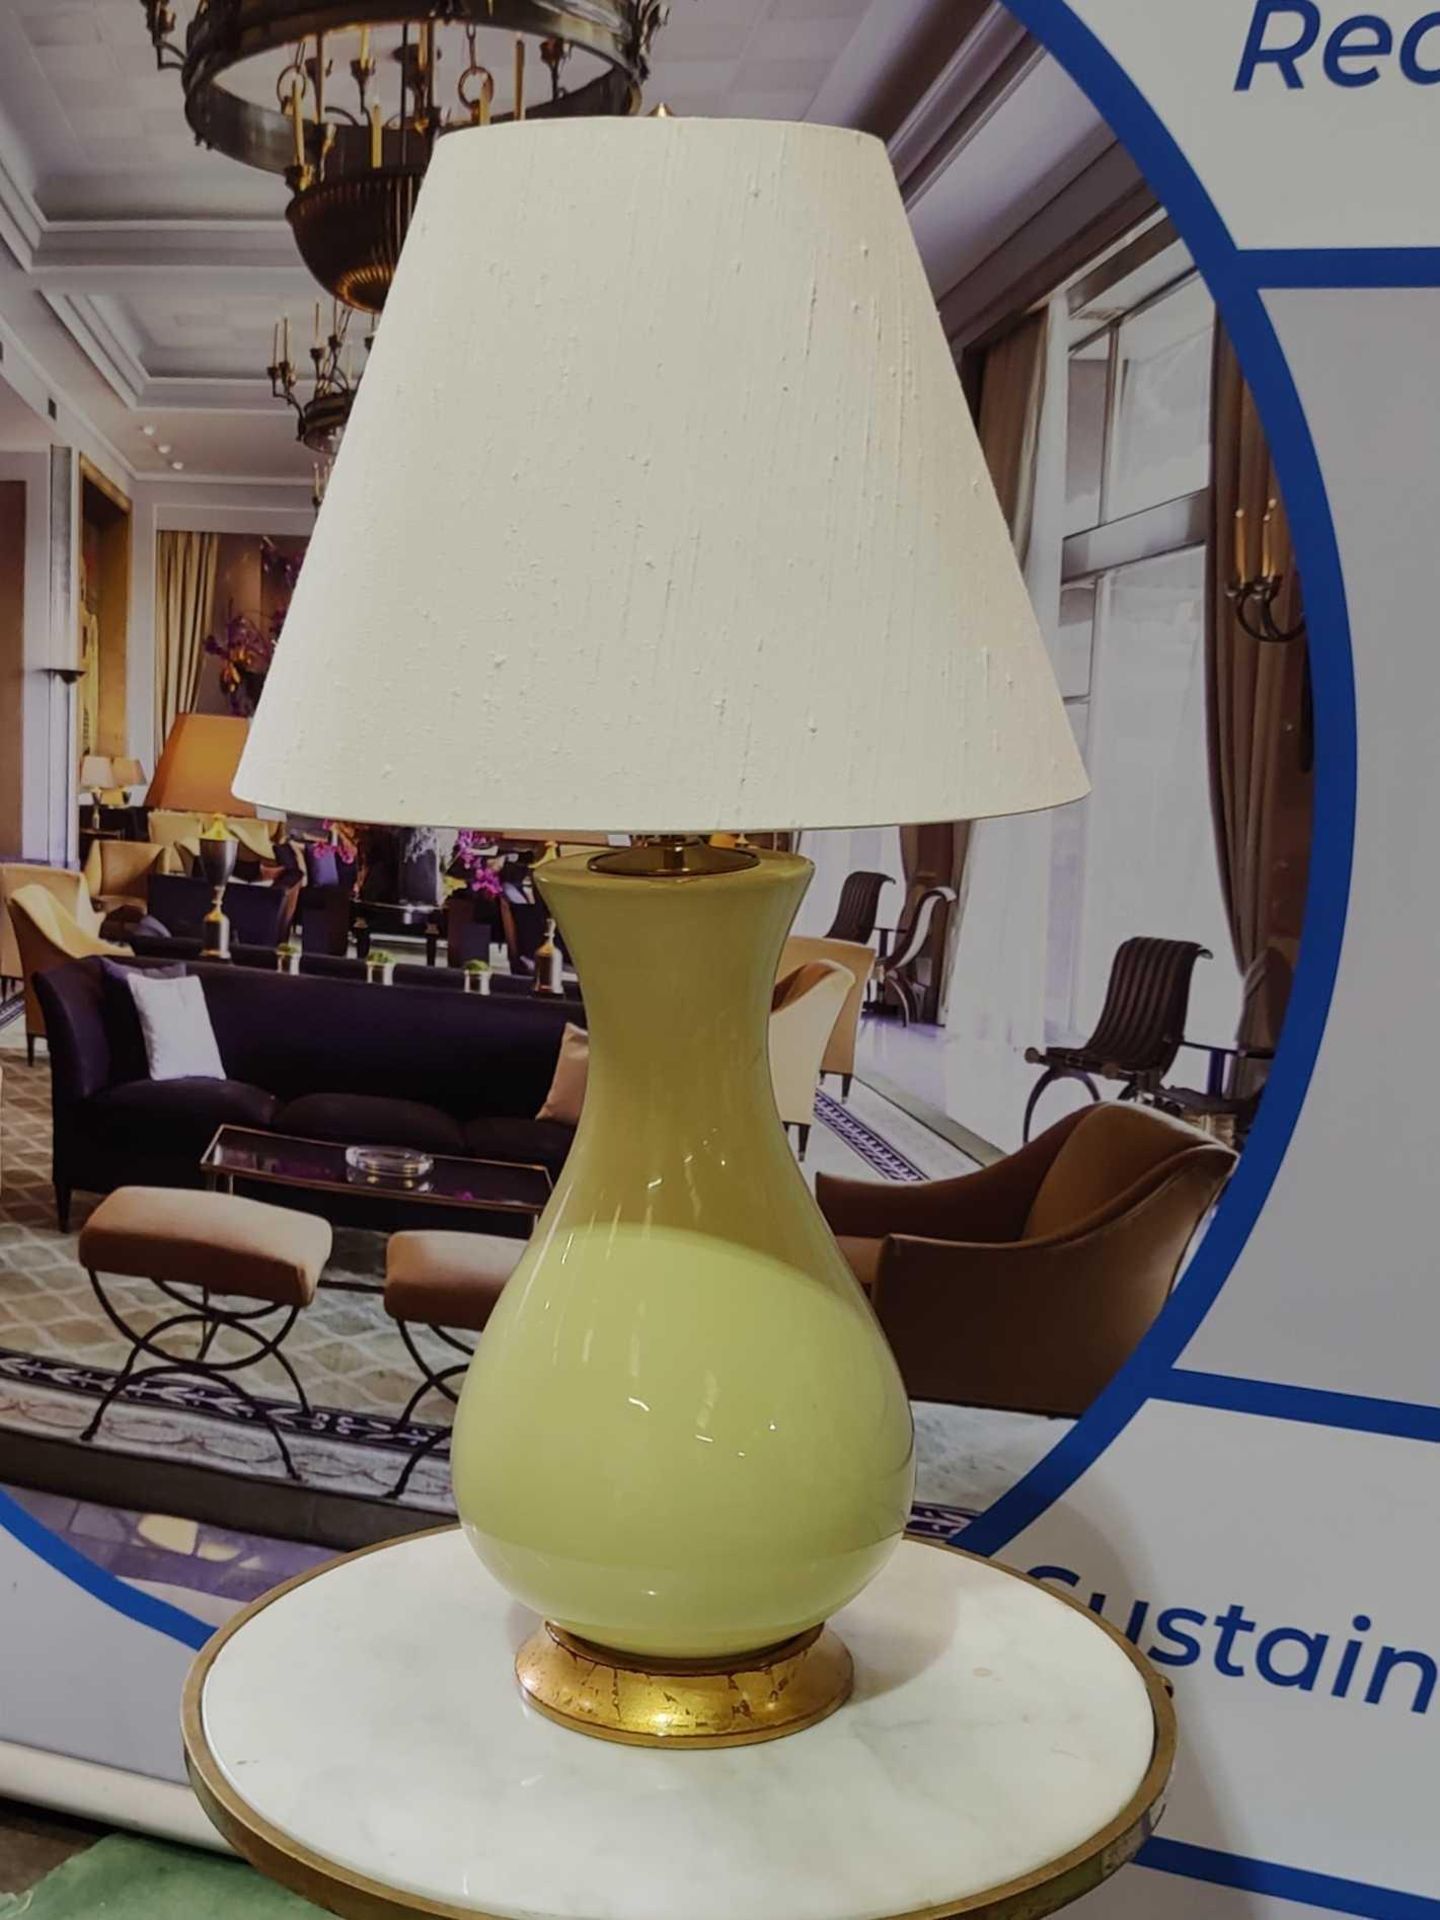 A pair of Heathfield And Co Louisa Glazed Ceramic Table Lamp With Textured Shade 76cm - Image 3 of 5